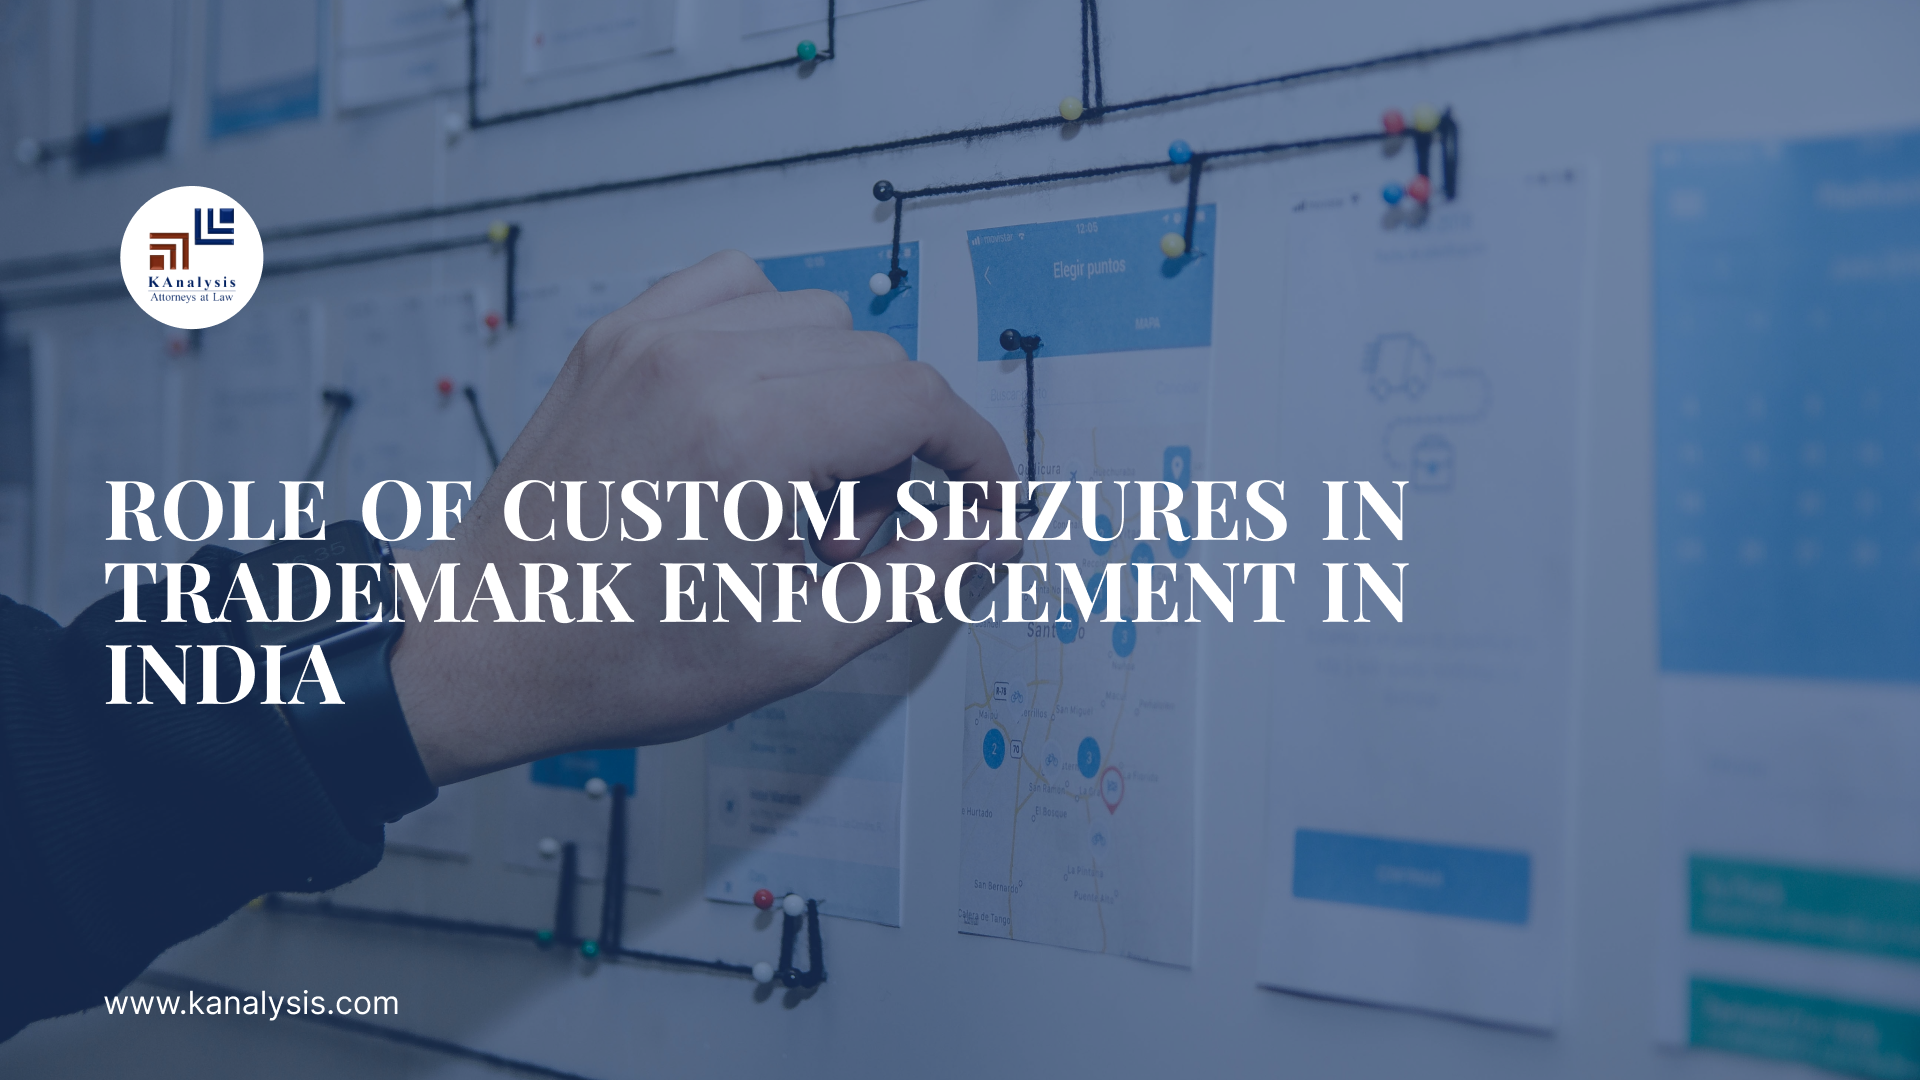 <strong>ROLE OF CUSTOM SEIZURES IN TRADEMARK ENFORCEMENT IN INDIA</strong>